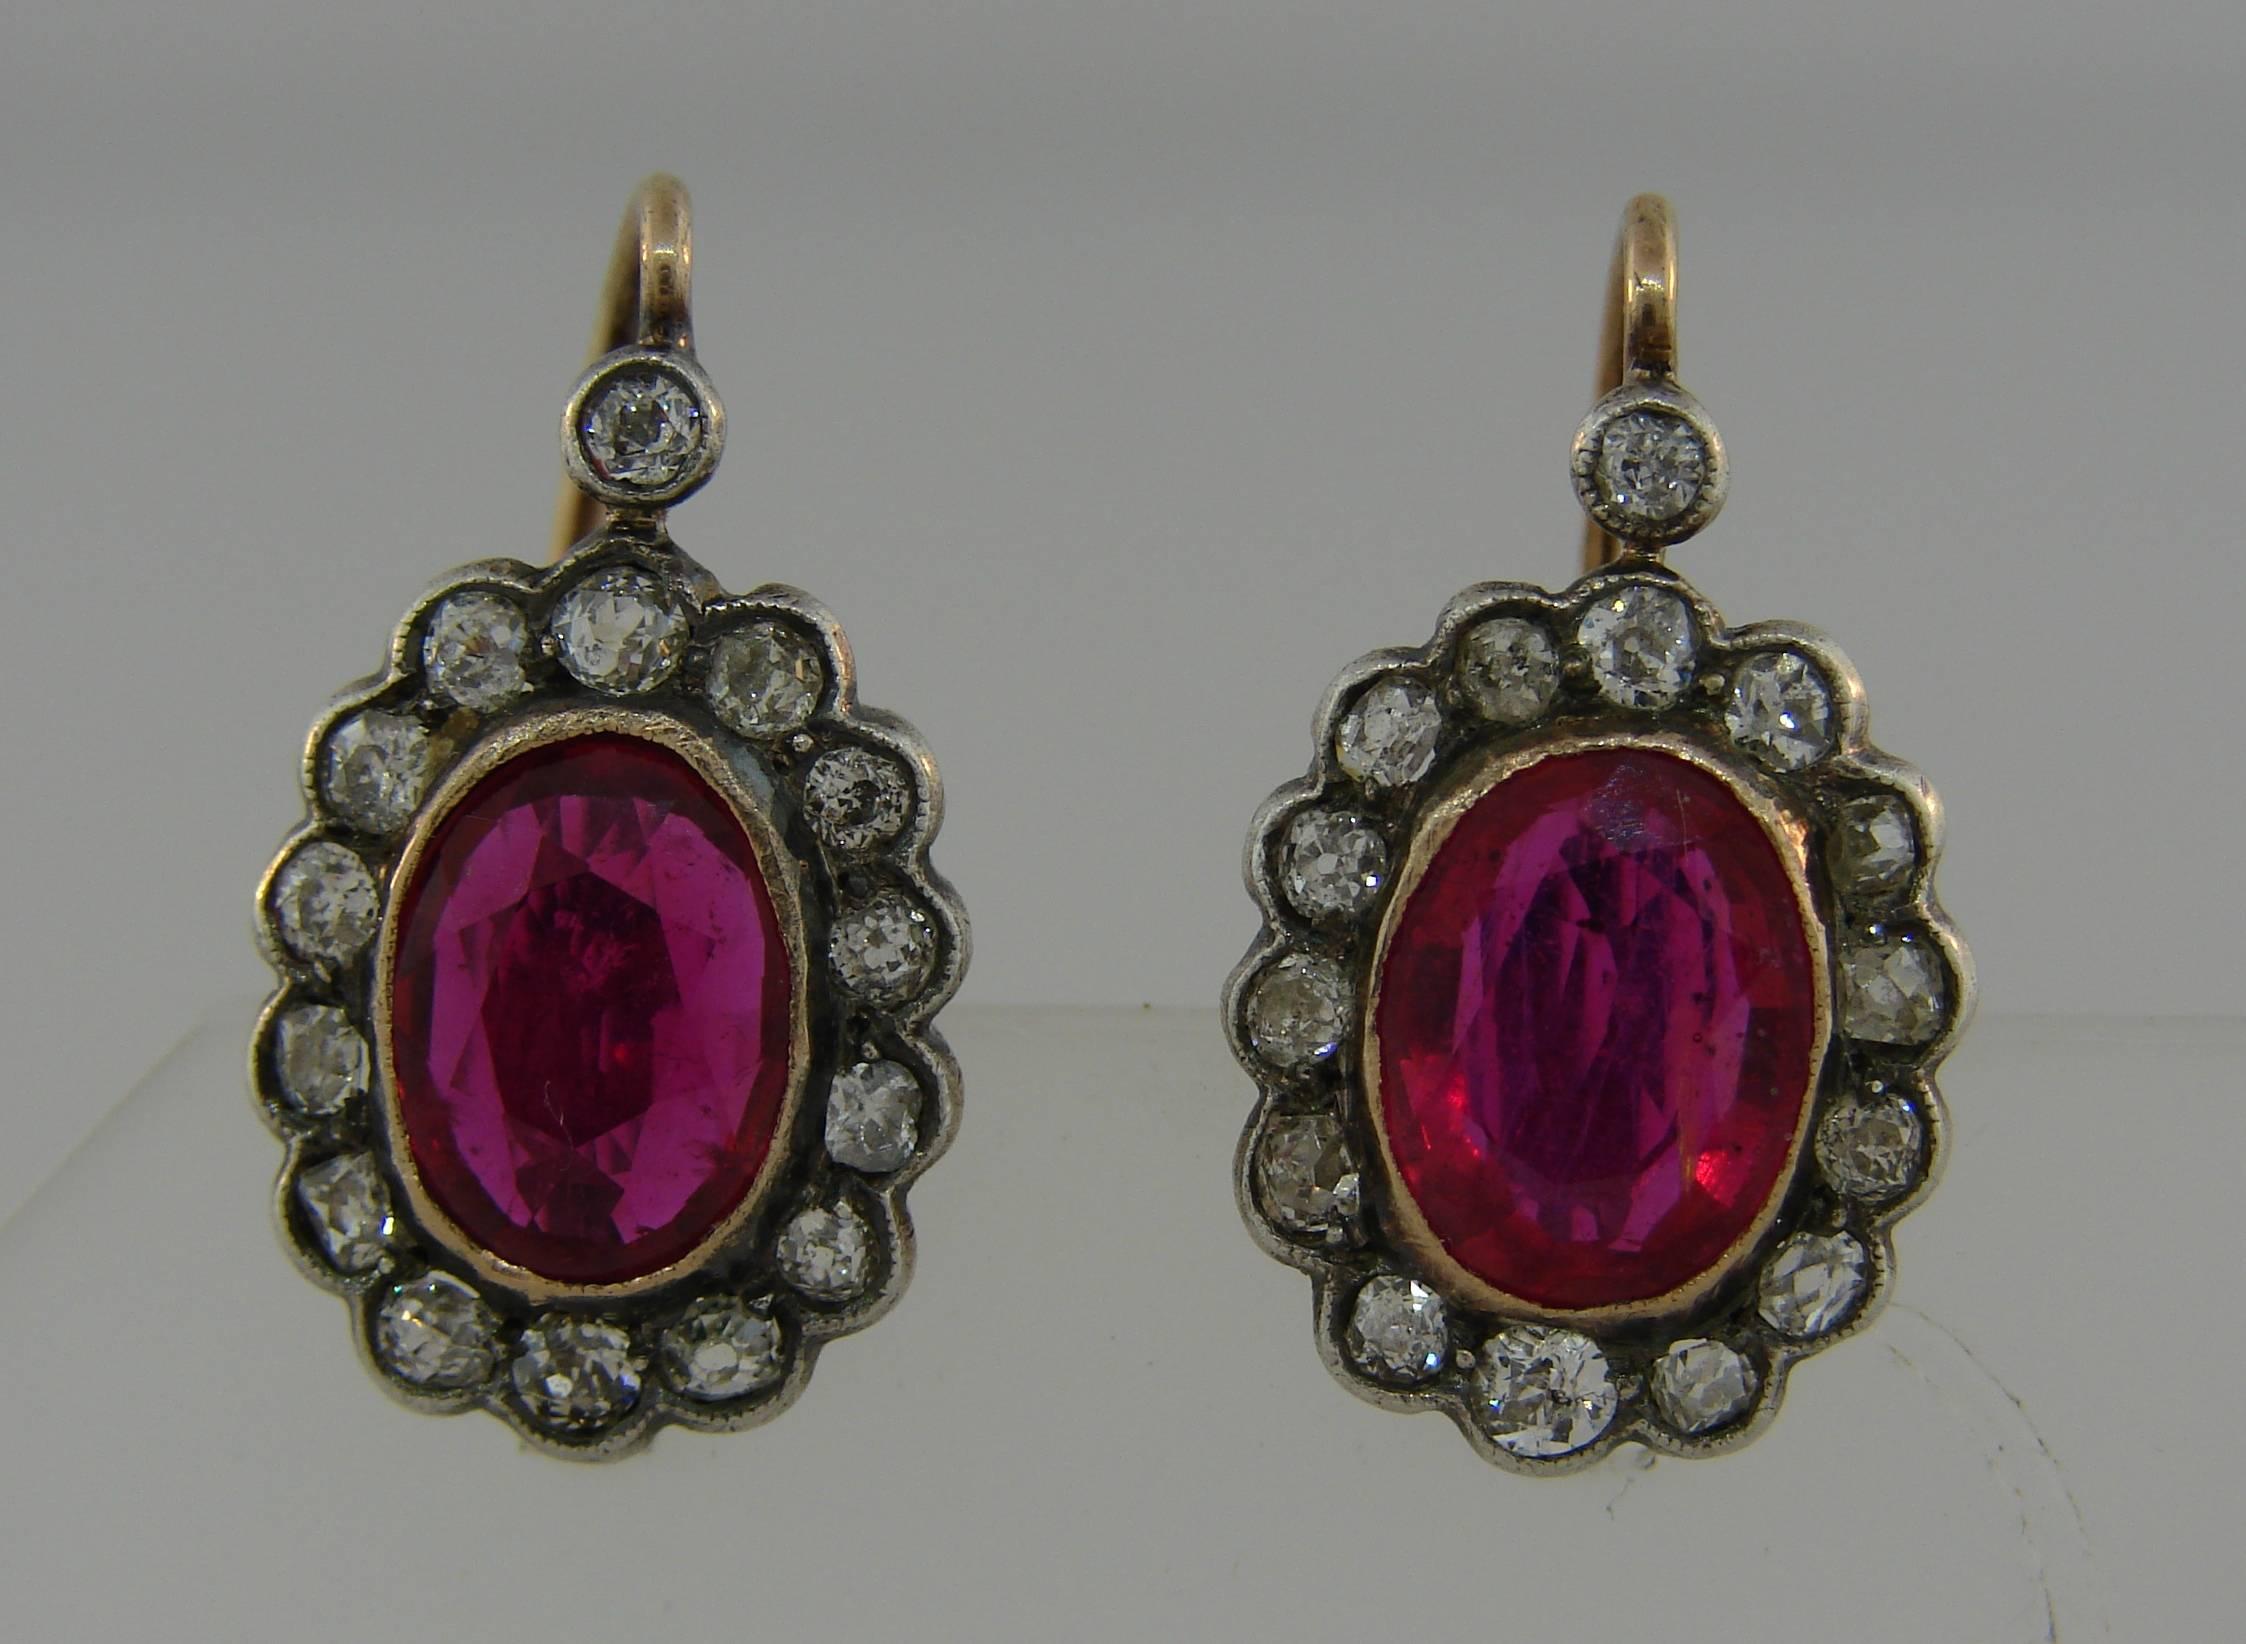 Gorgeous pair of cluster earrings featuring rubies and diamonds. Classic and timeless earrings that are a great addition to your jewelry collection. 

The rubies are natural glass composite. They are oval faceted and weigh approximately 1.72 and